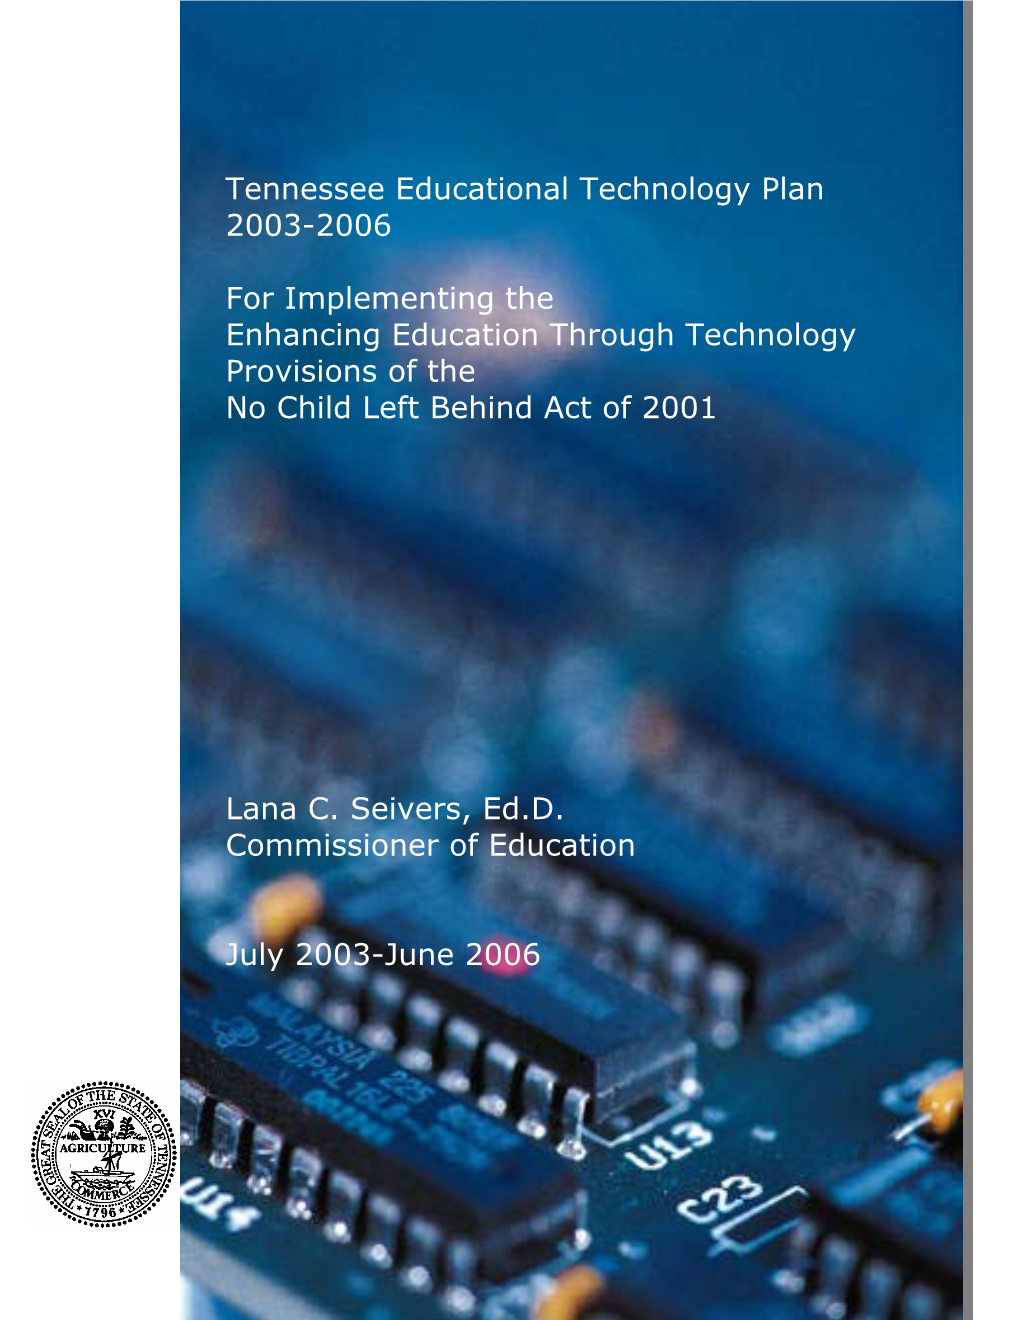 Tennessee Educational Technology Plan 2003-2006 for Implementing